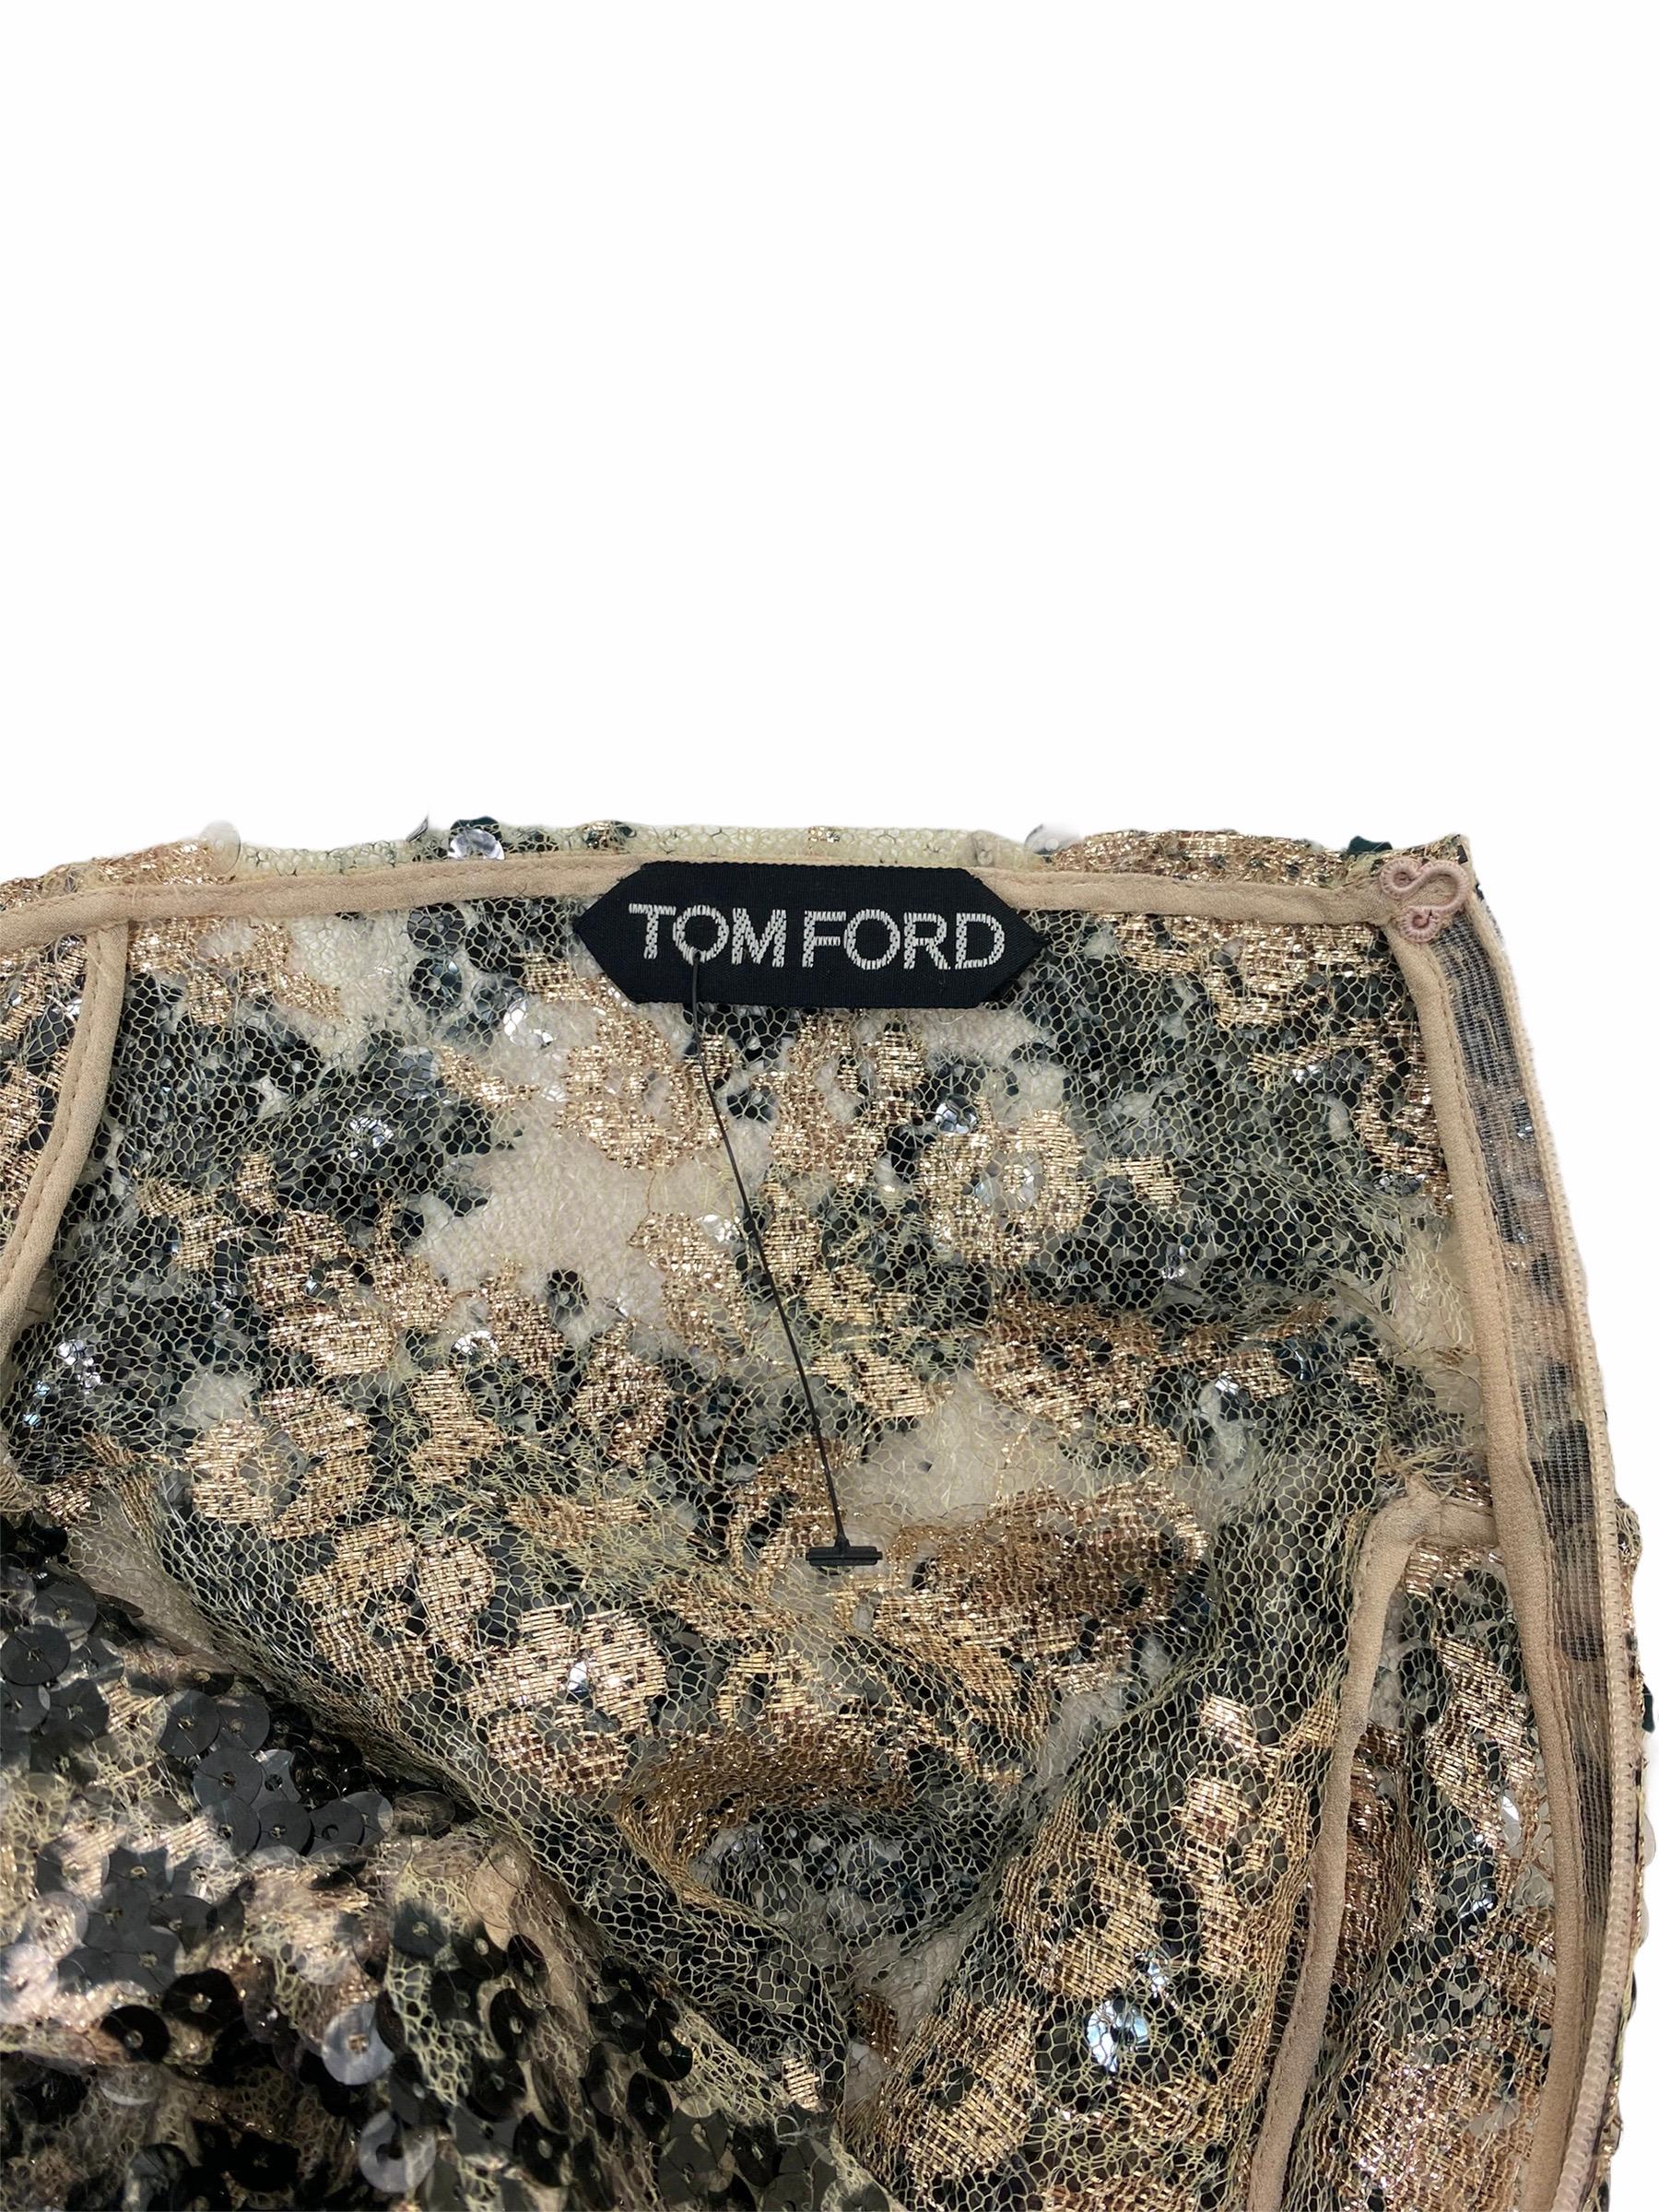 tom ford embroidered dress